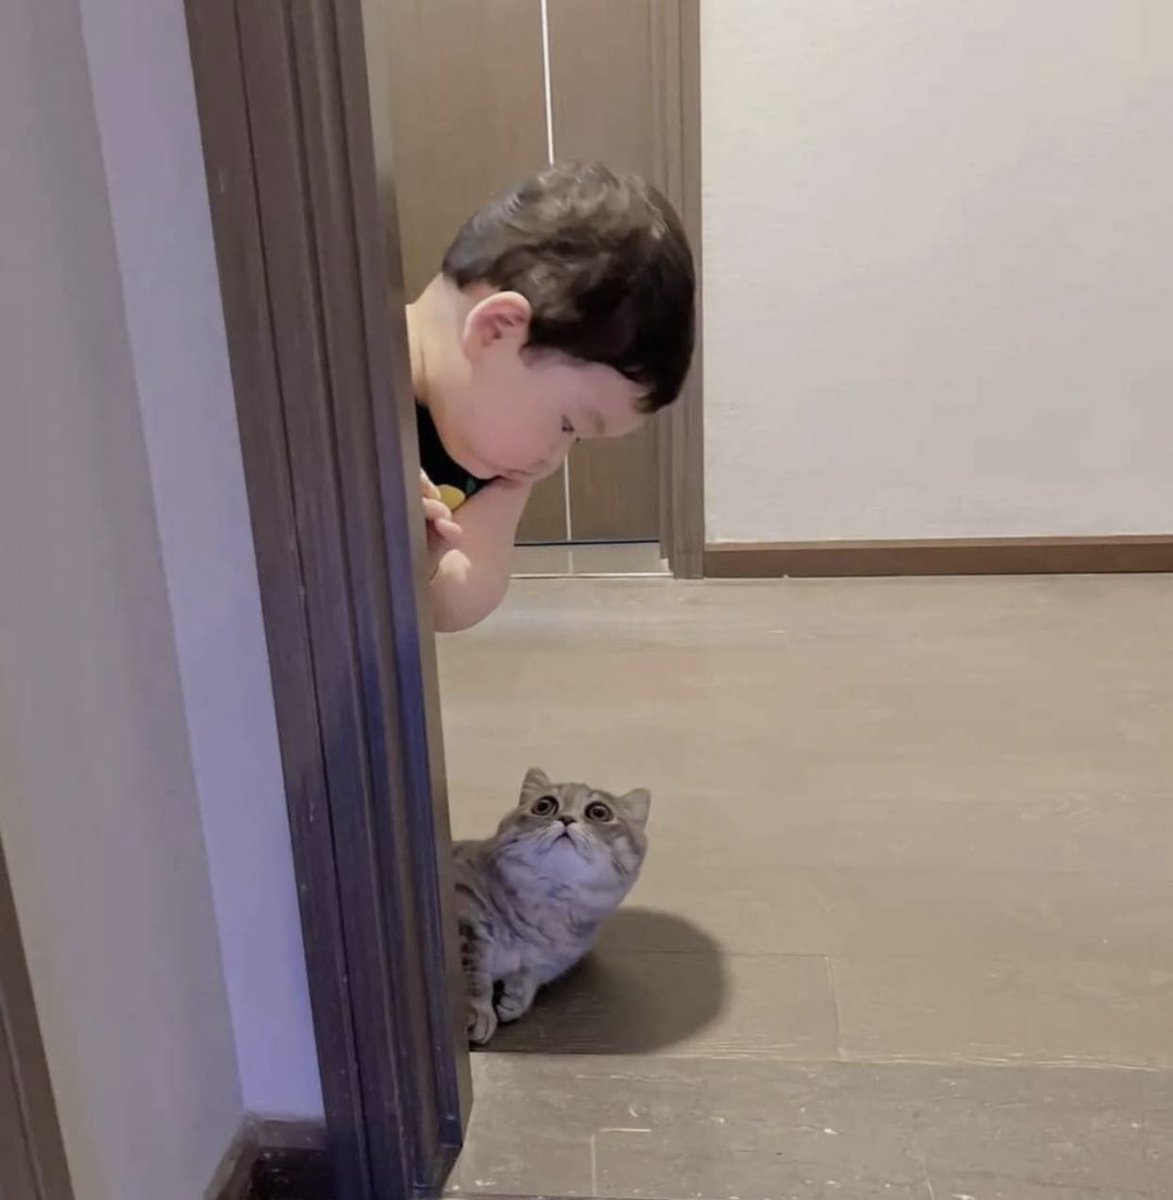 A cat and a child suddenly appear and end up in the same pose